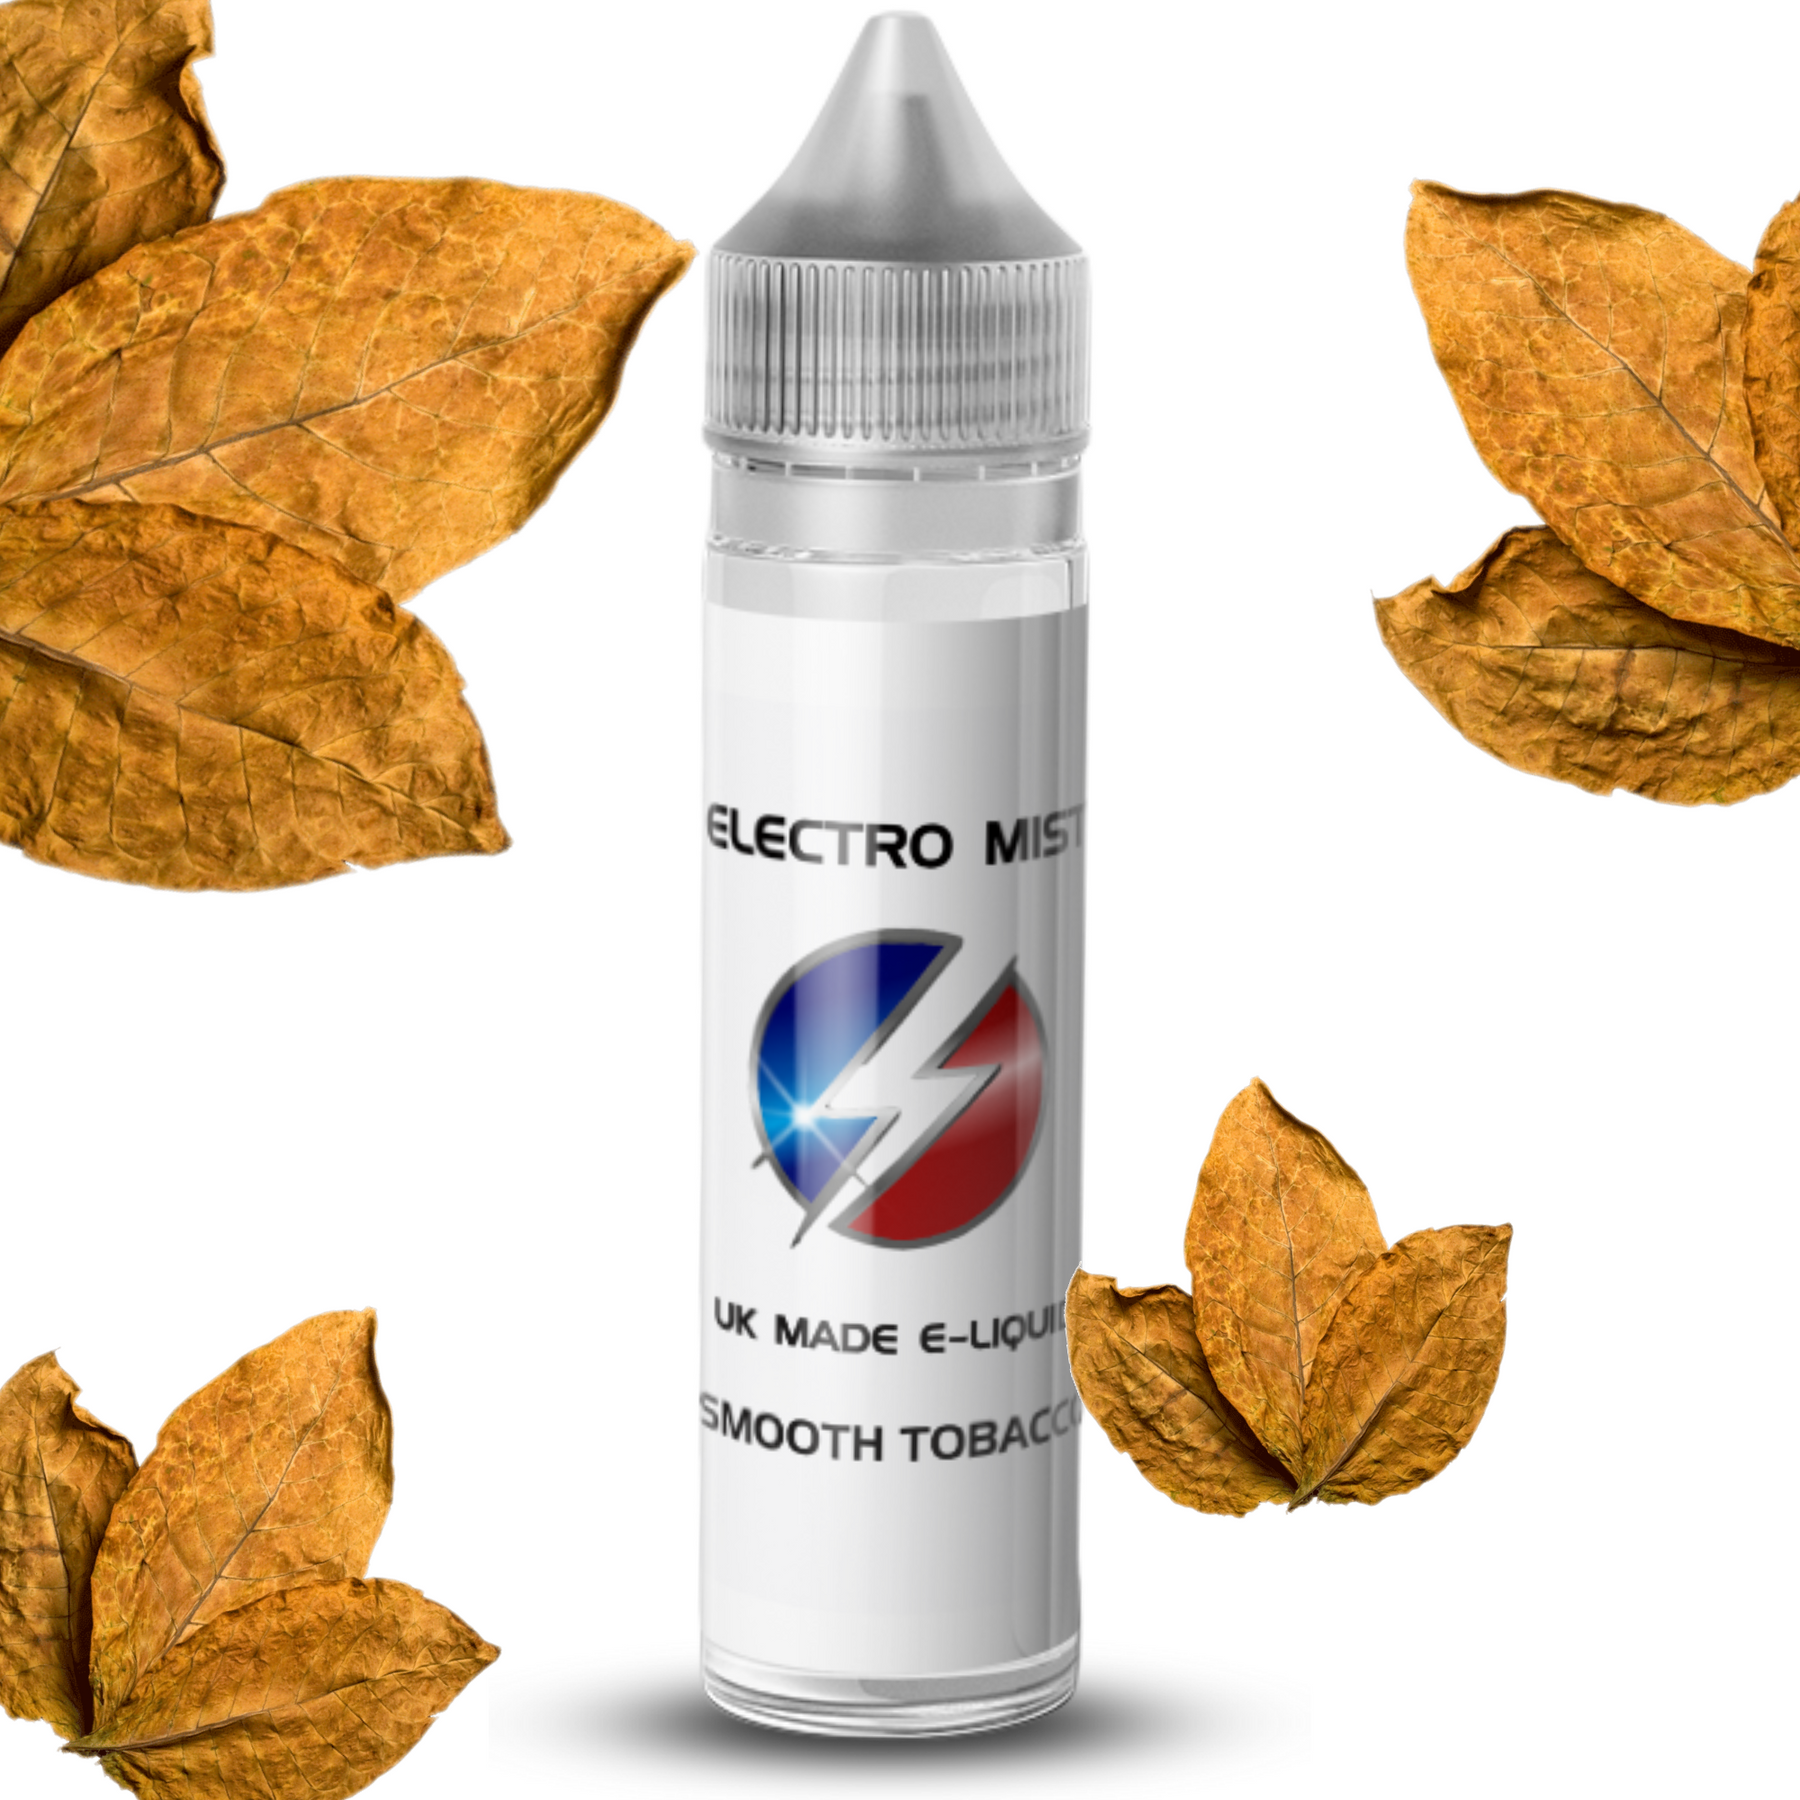 Electromist 50ml, the brand that you can trust for amazing flavour. Get your taste buds ready for a Smooth Tobacco flavour sensation. 0mg Nicotine. ejuice, vape pen, eliquid, e cigarette, 50ml, vaping, PG, VG, 70/30, vape liquid, Flavour, Smooth Tobacco, cloud.